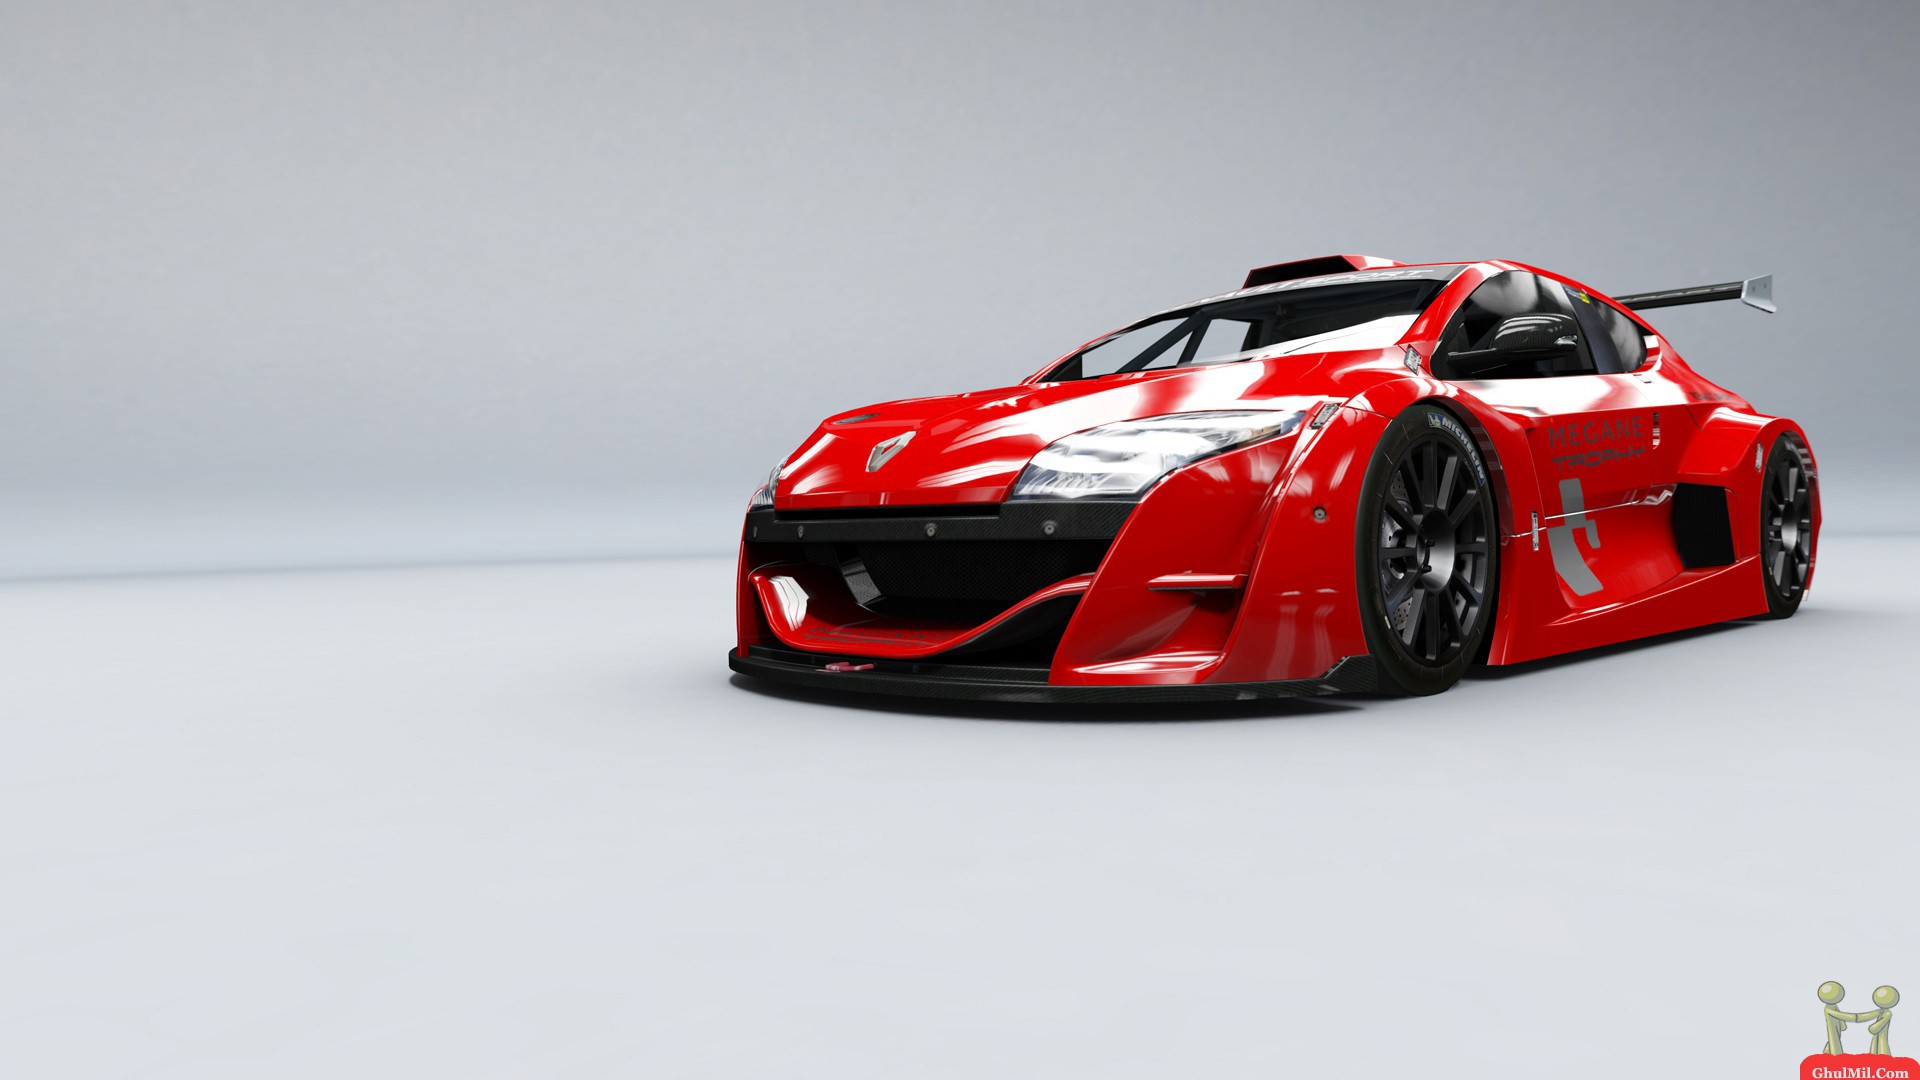 Awesome Car Wallpaper Racing Beautiful Red